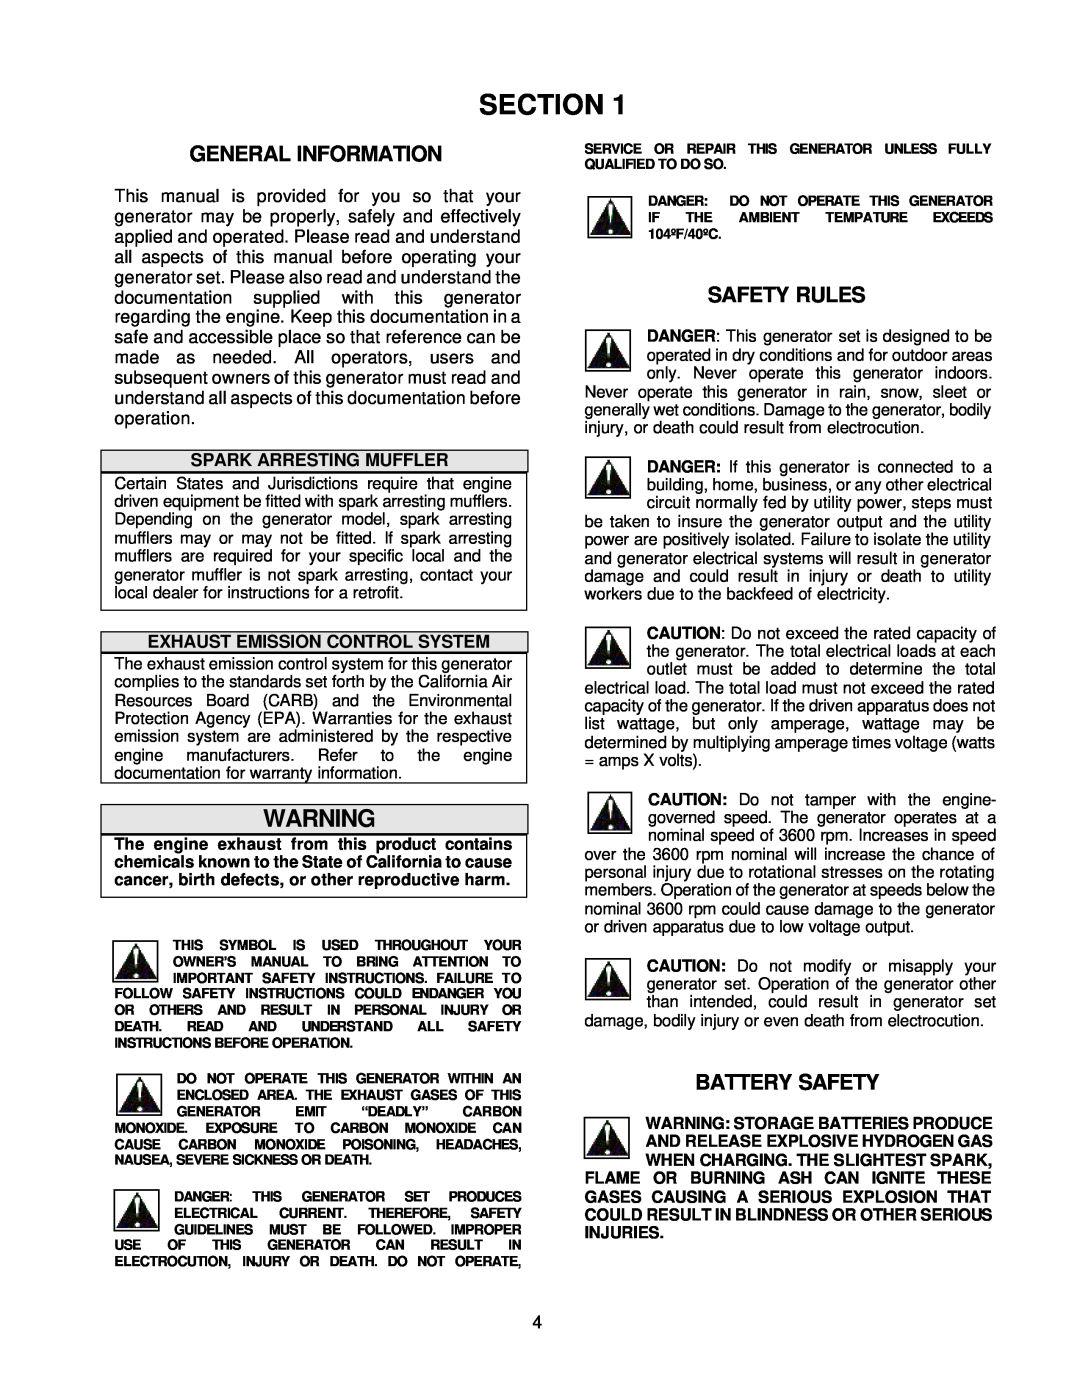 Chicago Electric 42725 Section, General Information, Safety Rules, Battery Safety, Spark Arresting Muffler, Injuries 